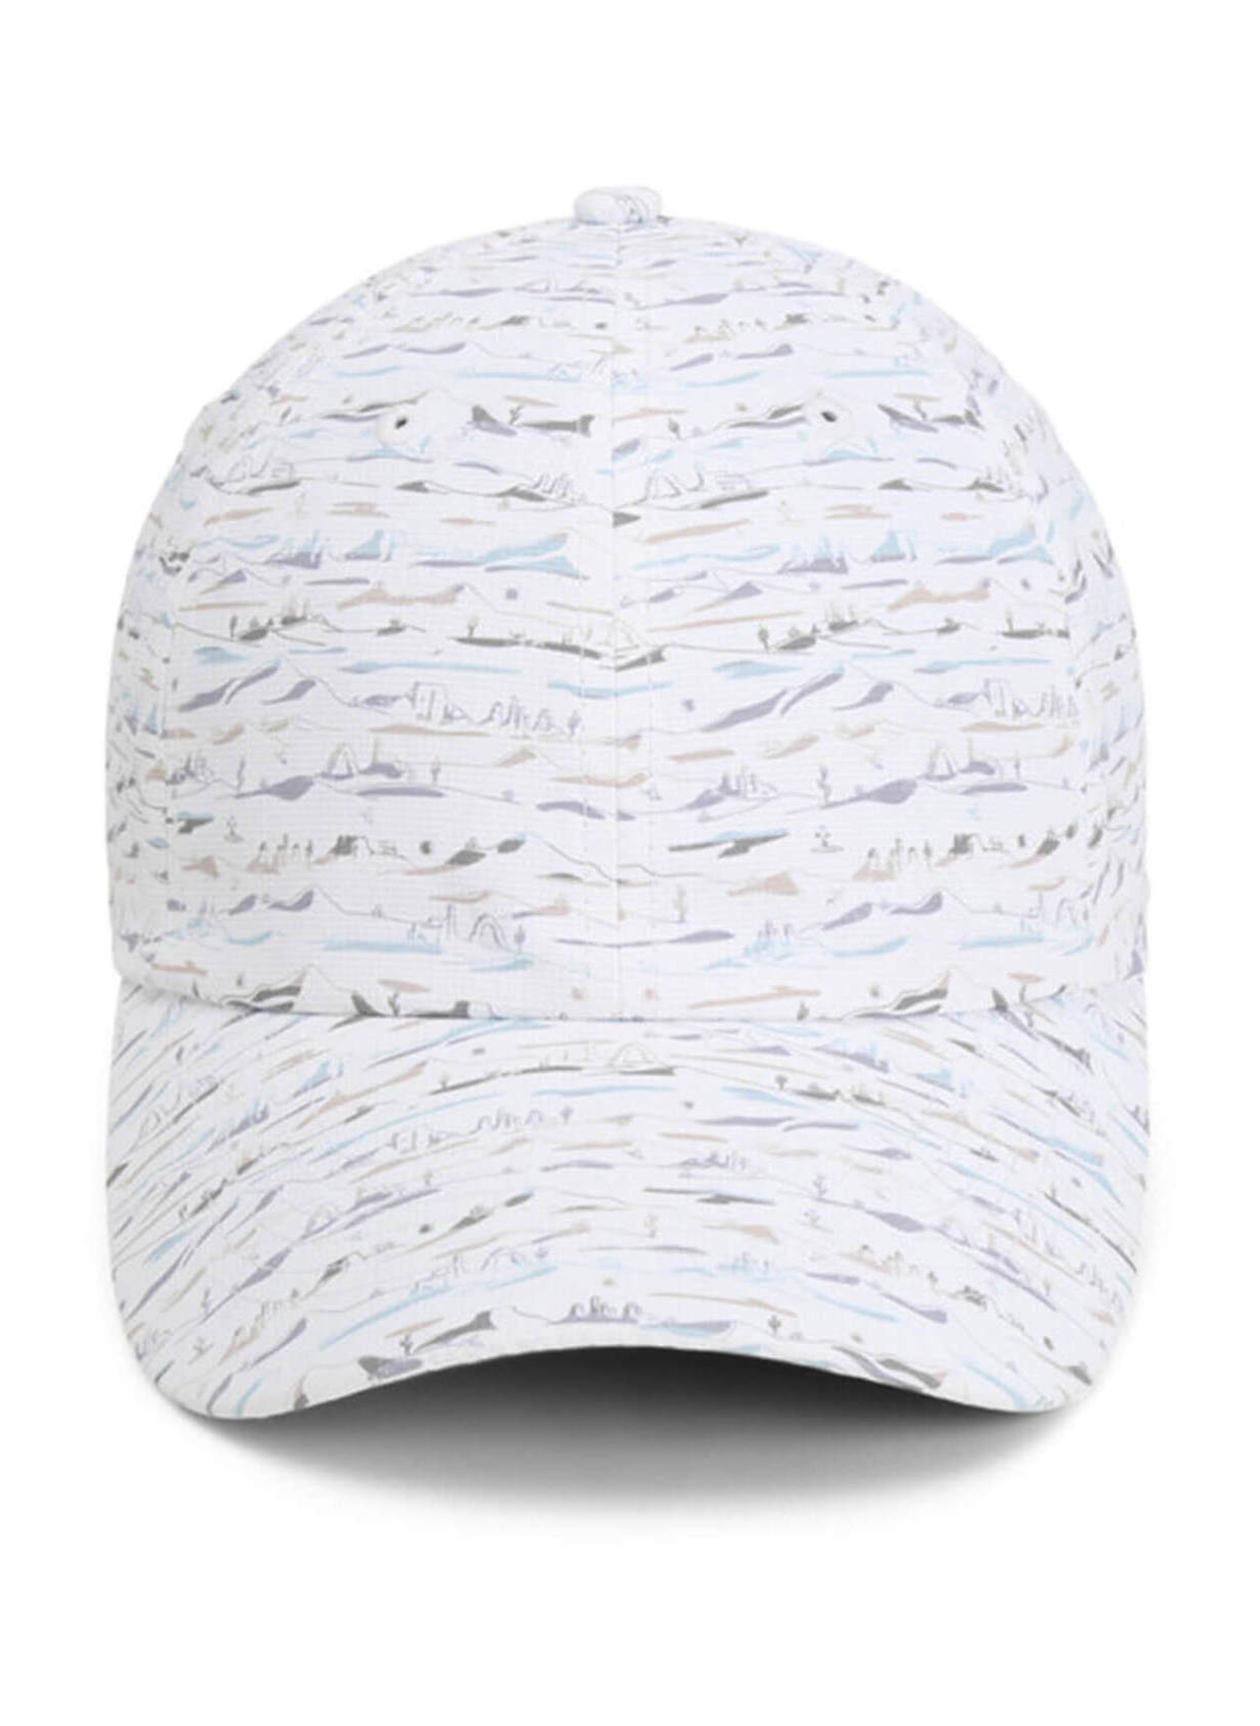 Imperial White / Desert The Alter Ego Pattered Performance Hat